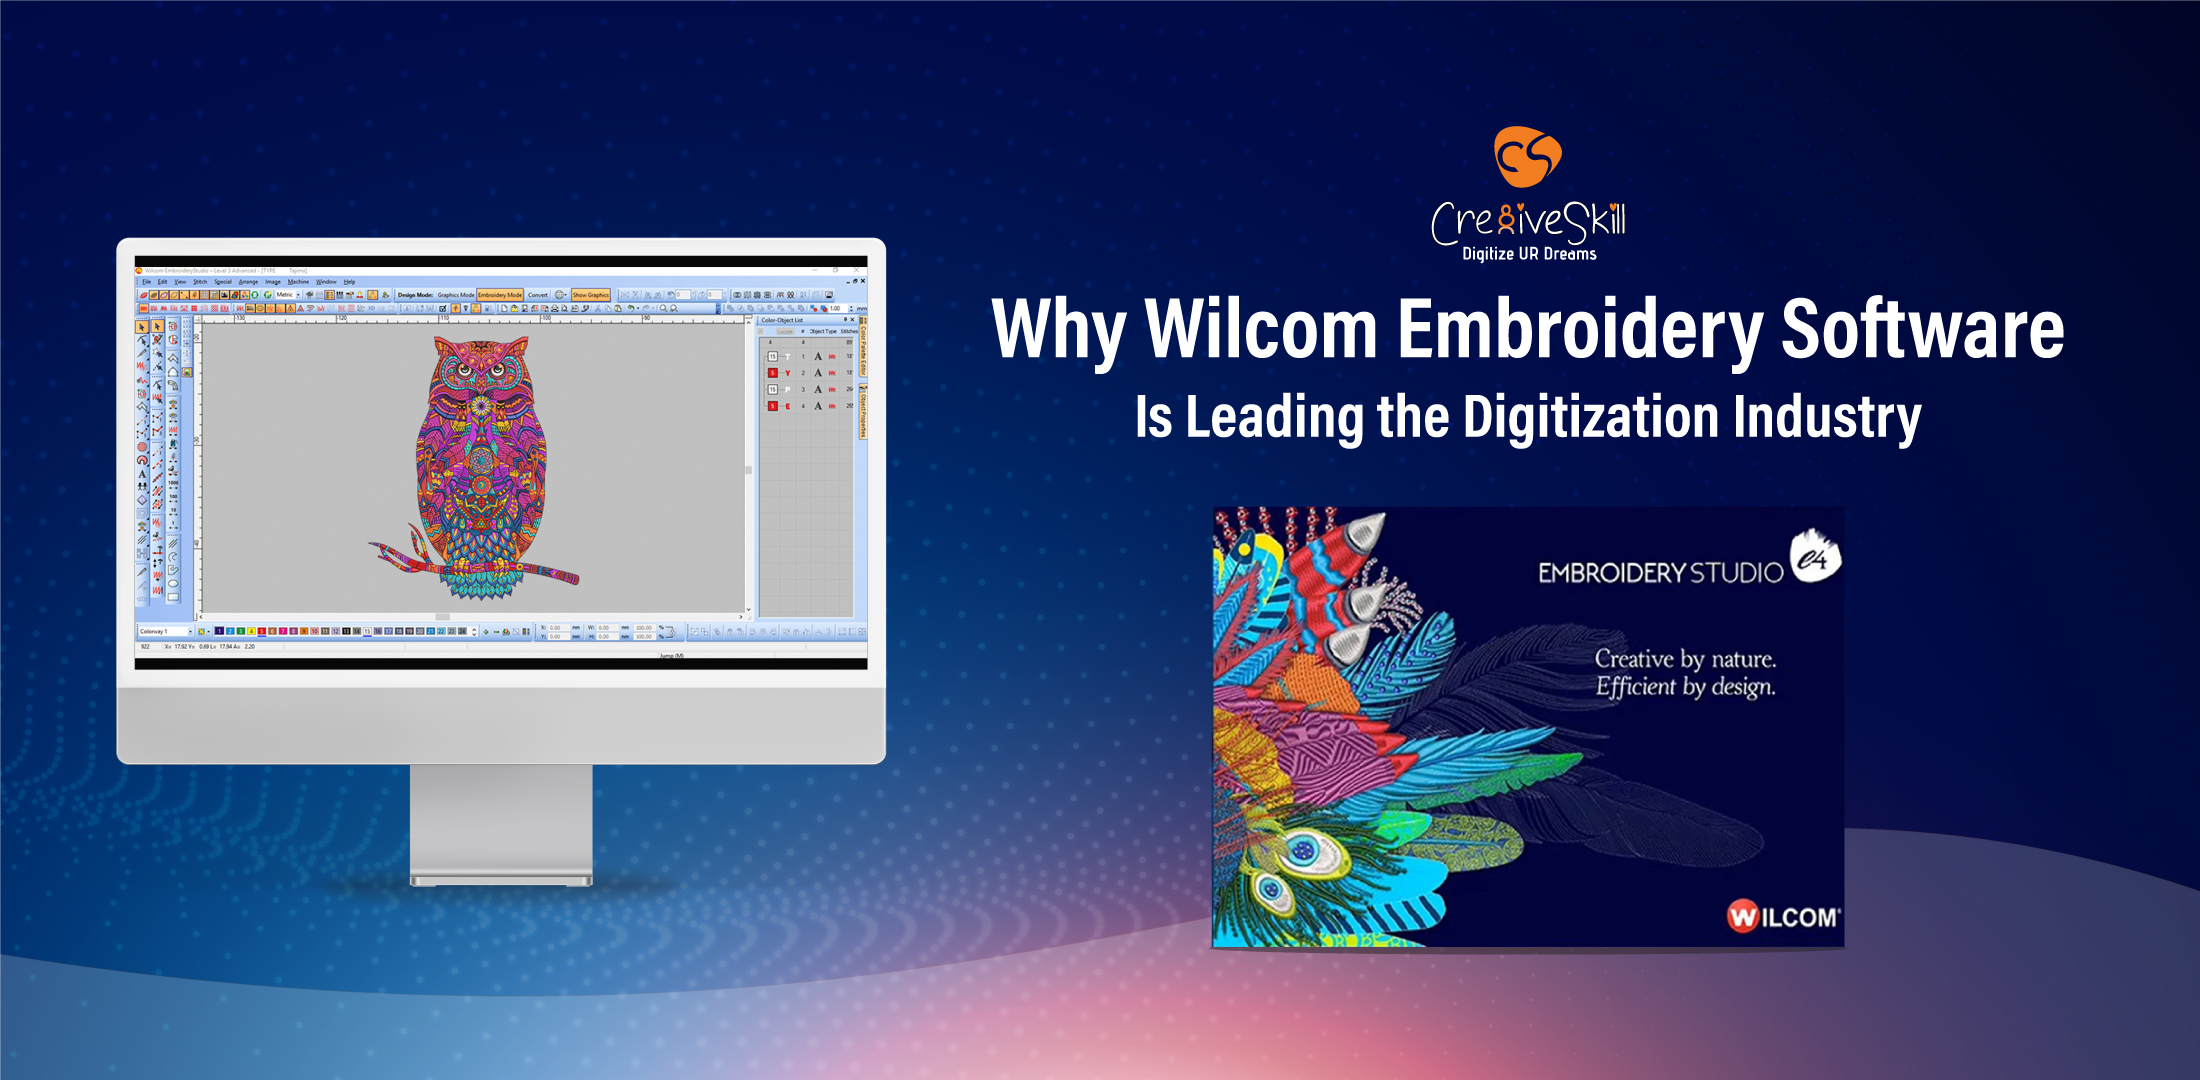 Why Wilcom Embroidery Software Is Leading the Digitization Industry